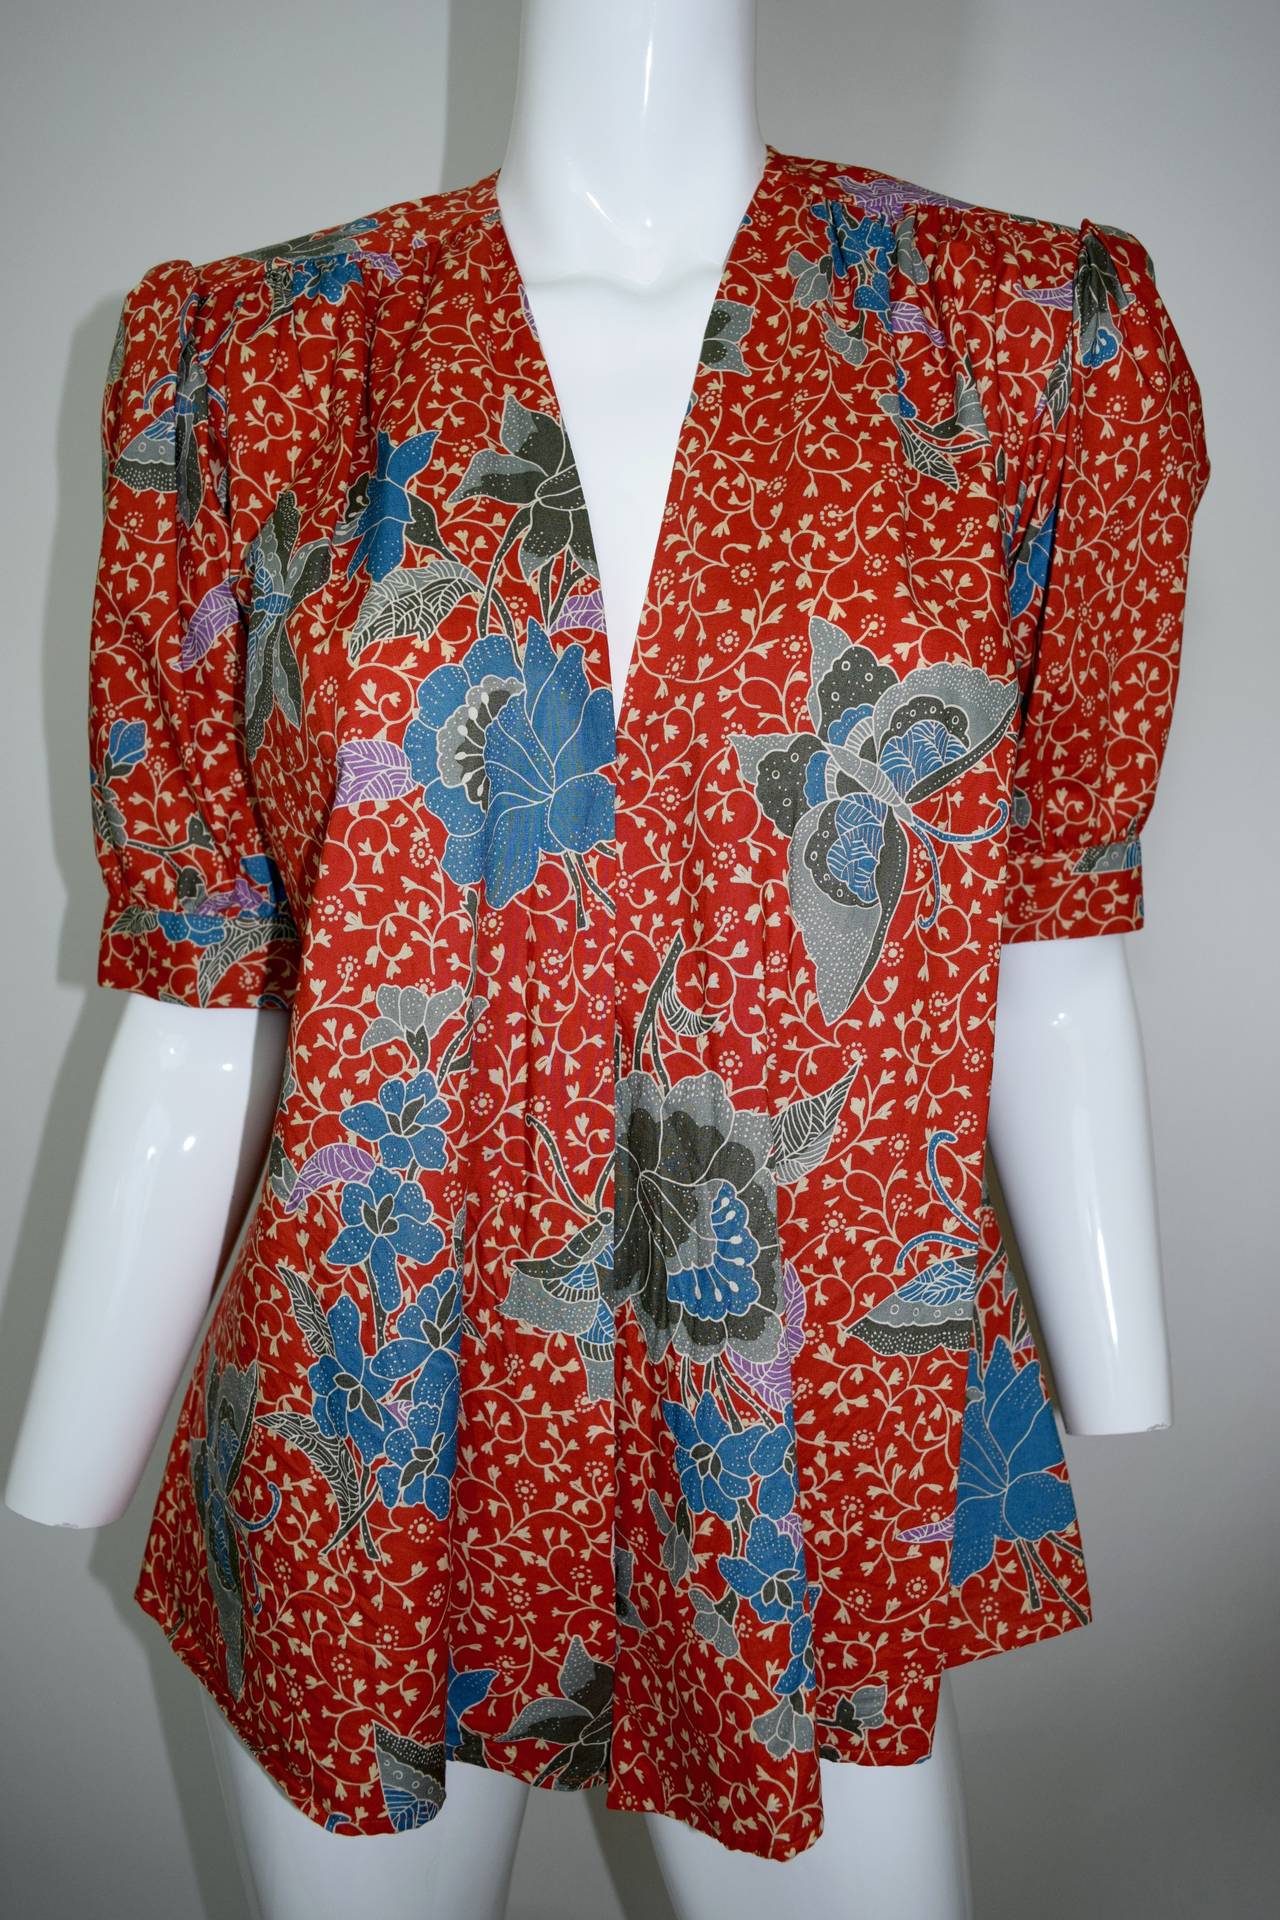 This is a beautiful vintage open front floral and butterfly print cotton jacket and blouse. The green and blue printed butterflies and florals with lavender leaves are on  the YSL opium orange background. Open front and just above the elbow sleeves.